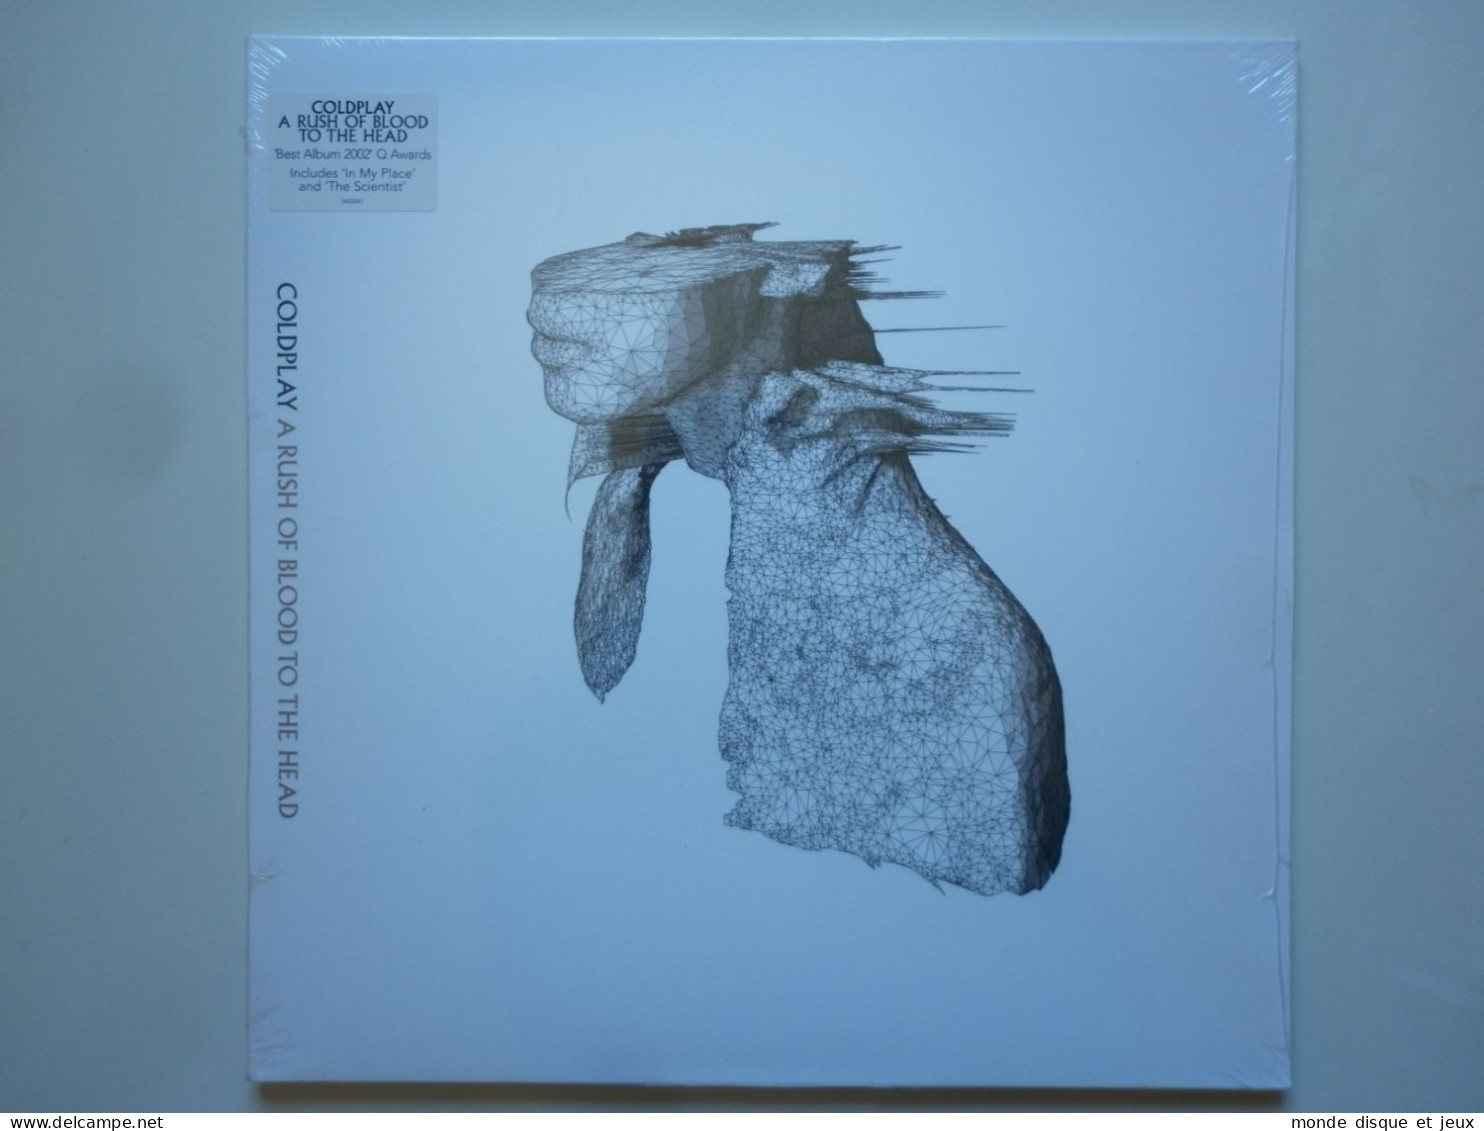 Coldplay Album 33Tours Vinyle A Rush Of Blood To The Head - Other - French Music